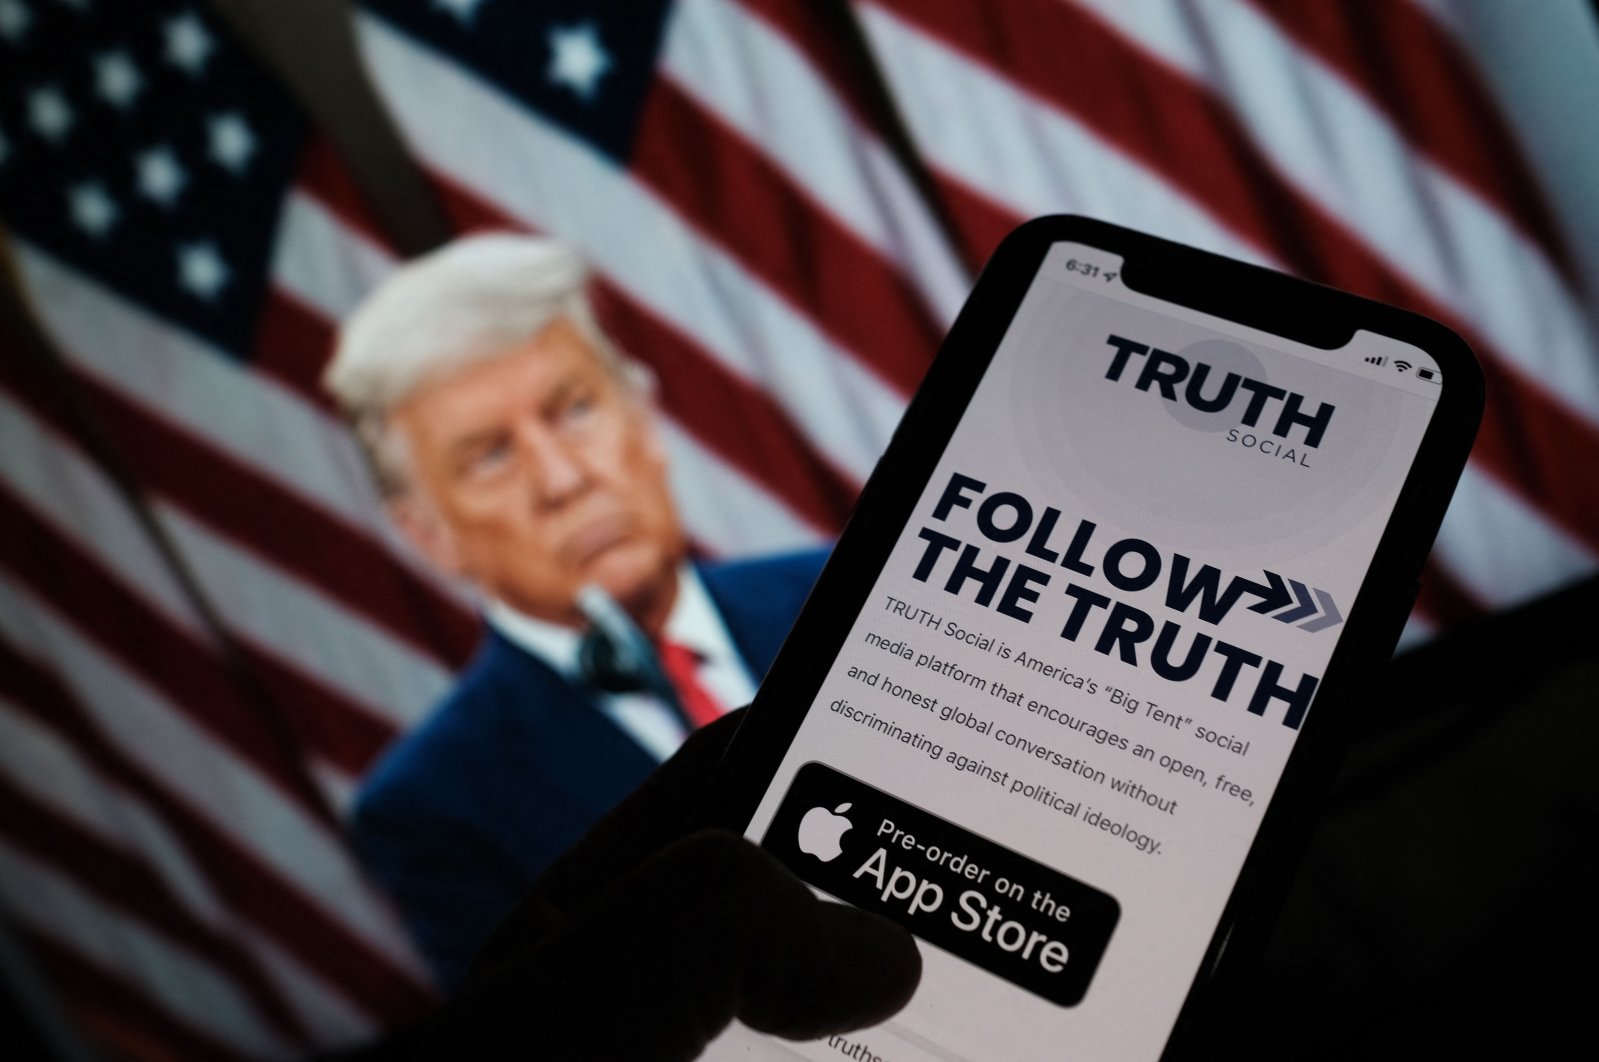 A person checking the app store on a smartphone for "Truth Social," with a photo of former U.S. President Donald Trump on a computer screen in the background, in Los Angeles, U.S., Oct. 20, 2021. (AFP Photo)